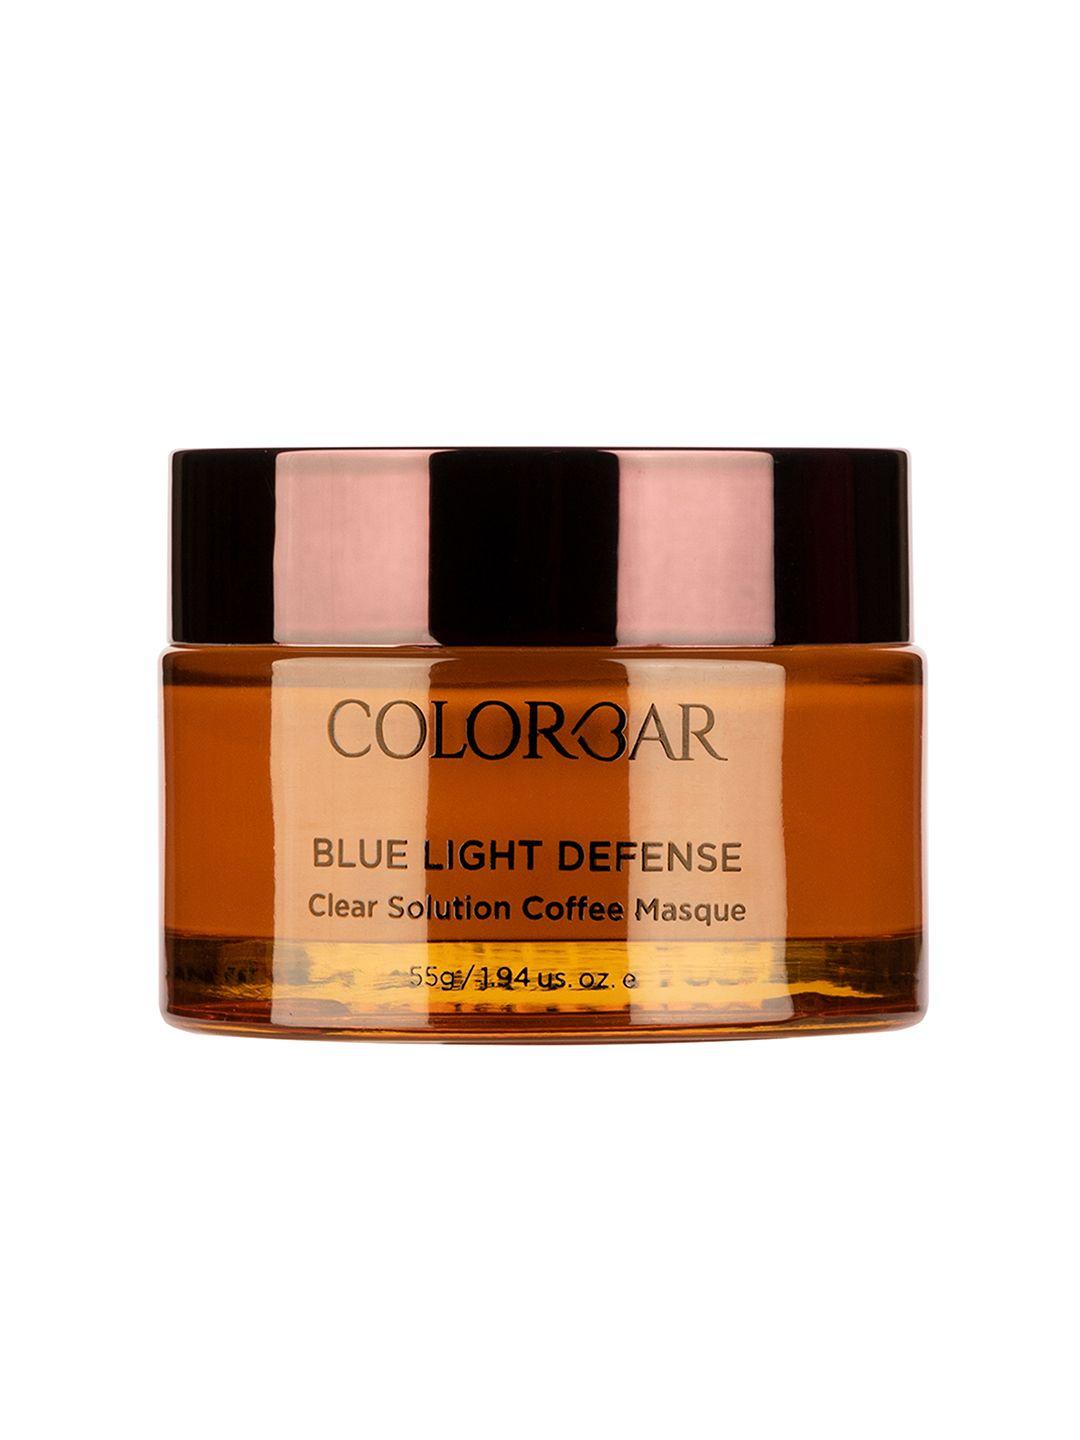 colorbar blue light defense clear solution coffee masque - 55g